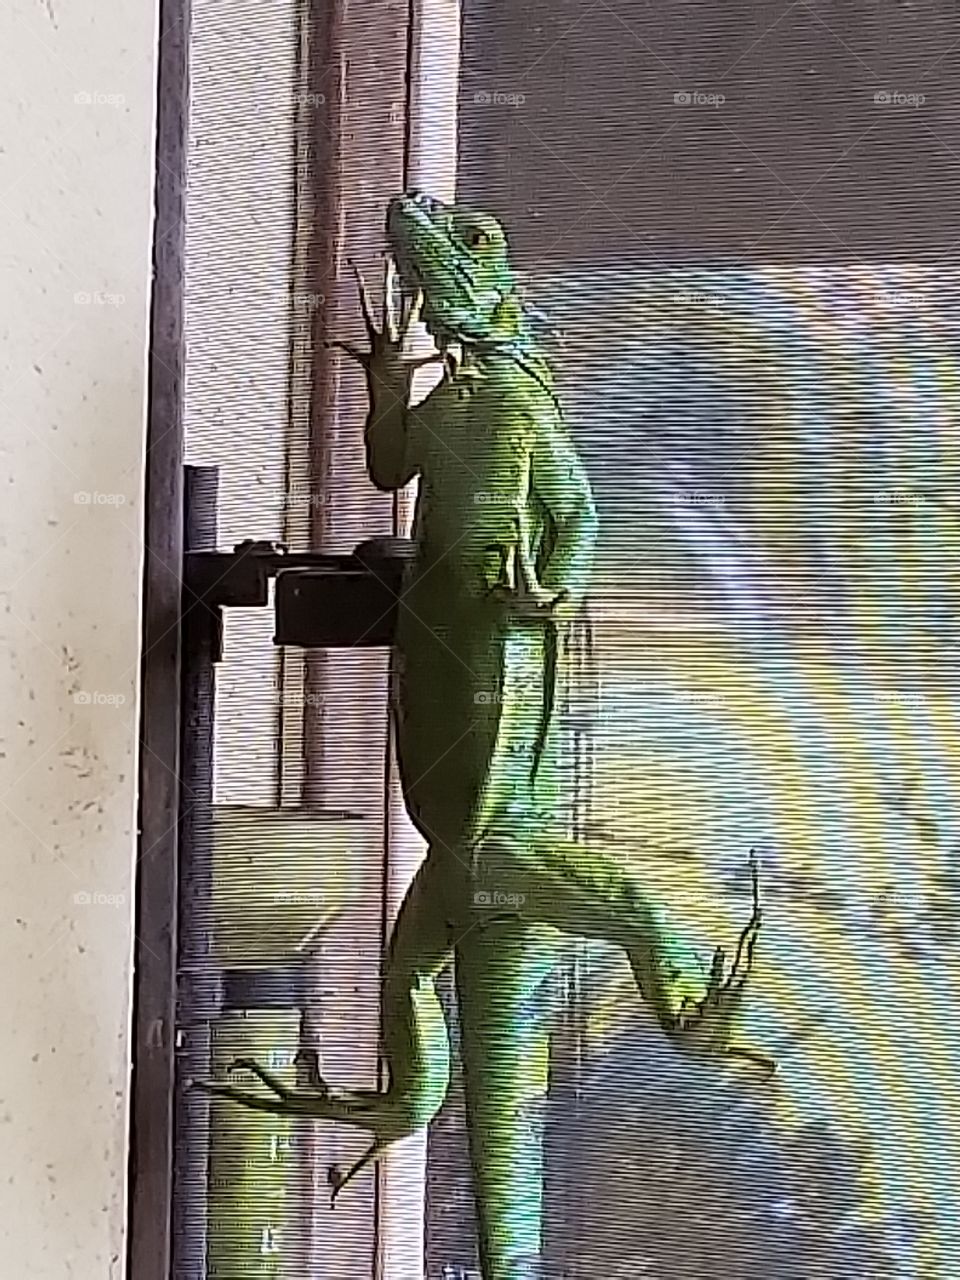 Live Iguana hanging out, fast, creepy cool green lizard back yard neighbors or dinosaurs